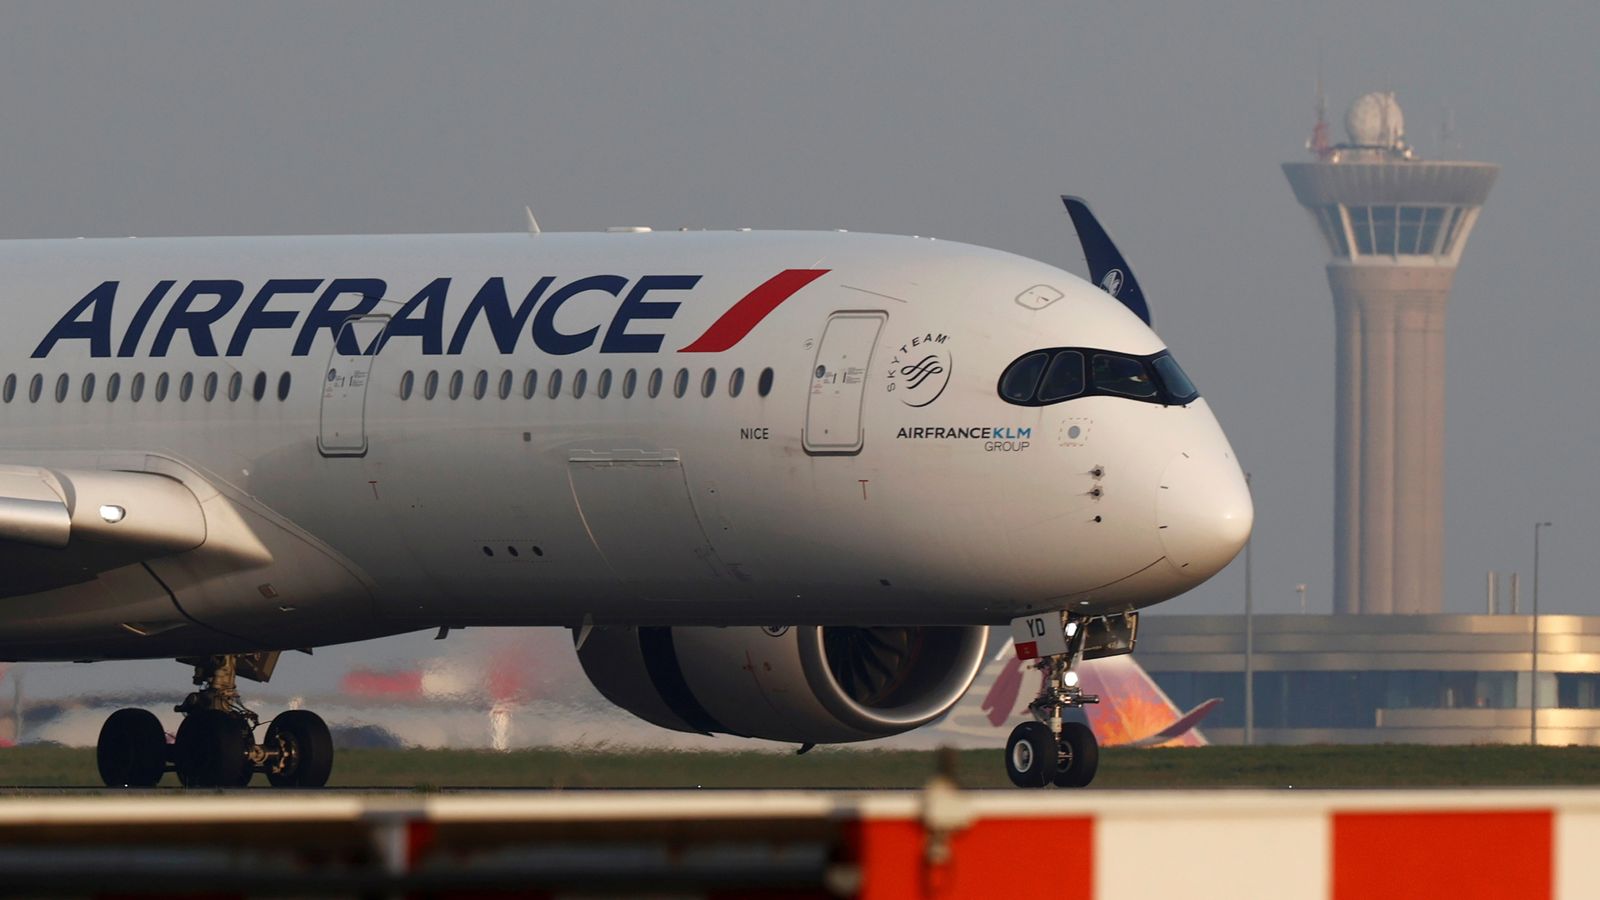 Paris and Nantes, Lyon and Bordeaux No-Fly Zones: France Takes Action to Reduce Carbon Emissions